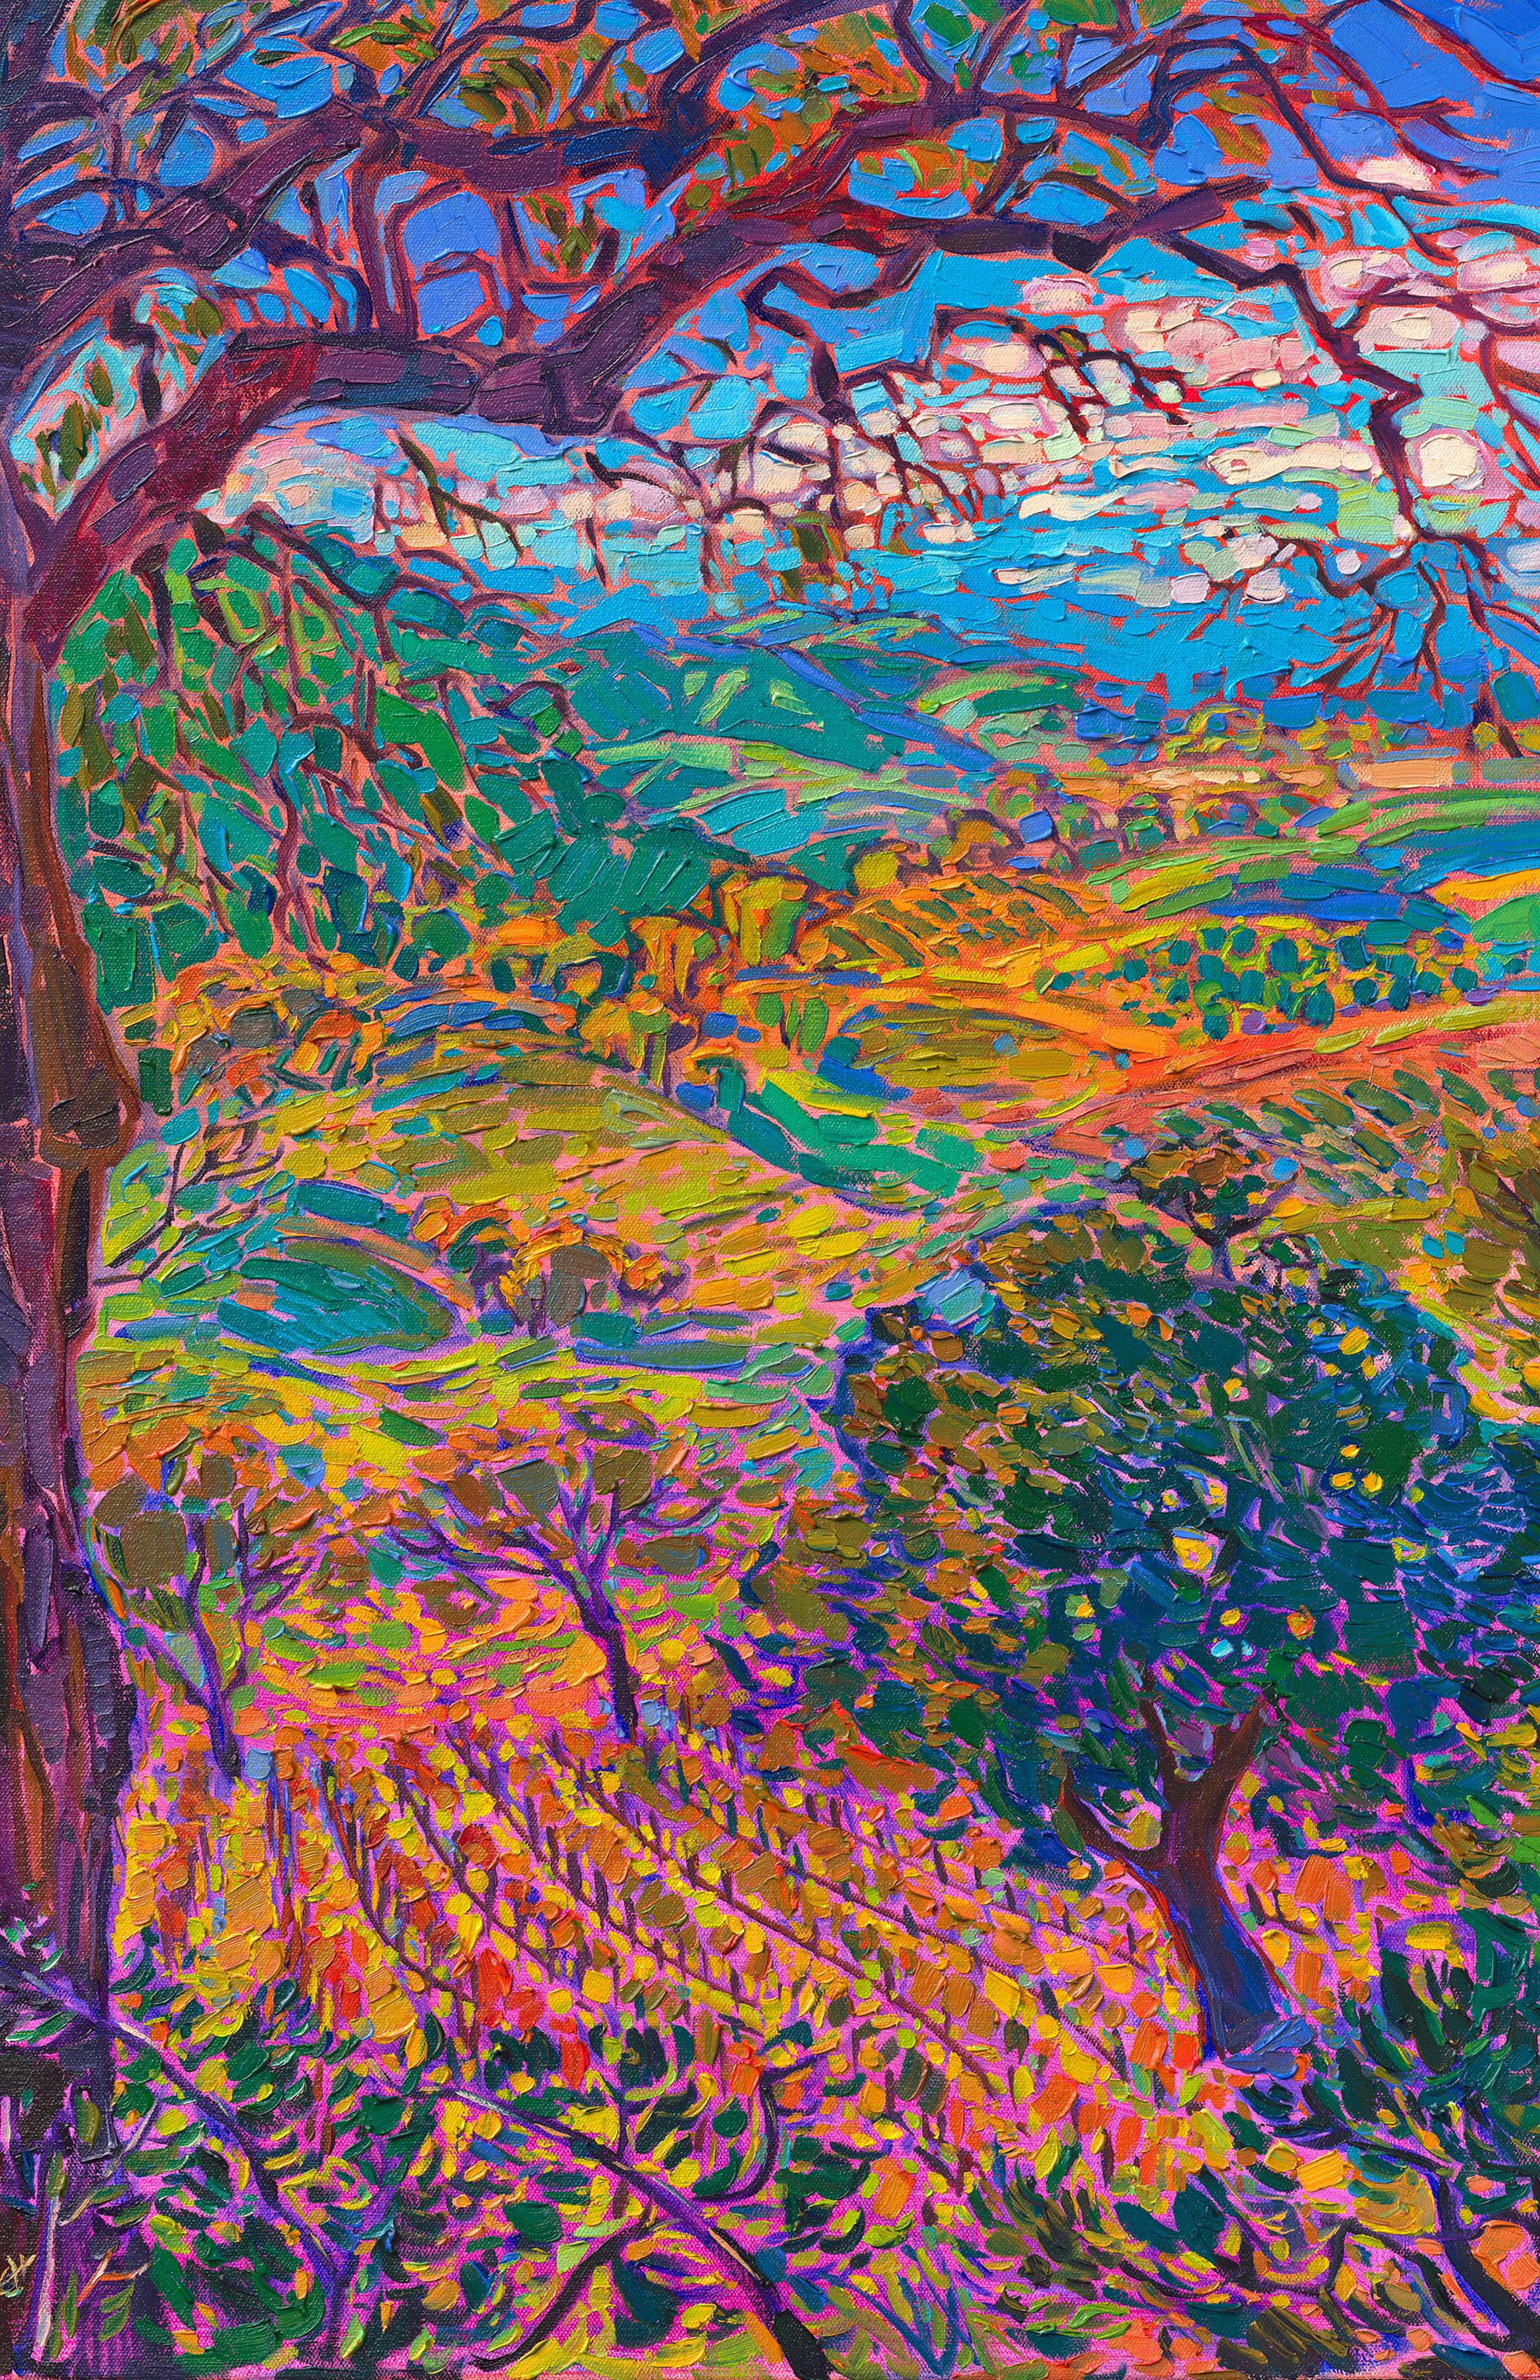 Wine Country Inspirations In 2010, Erin Hanson moved back to California, where she discovered the idyllic, rolling landscapes of Paso Robles wine country. She was immediately captivated by this romantic landscape of rounded oak trees and verdant hillsides, such a contrast to the stark, angular beauty of Red Rock Canyon. She began painting wine country paintings, applying the Open Impressionism technique she had developed while painting desertscapes to this new landscape of slopes and curves. Erin Hanson loved painting wine country so much that she published a coffee table book&nbsp; Wine Country: Impressions in Oil , which contains over 300 pages of wine country-inspired works from Paso Robles, Temecula, Napa, Mendocino, Carmel Valley, and Oregon&#39;s Willamette Valley. &ldquo;Erin Hanson transforms landscapes into abstract mosaics of vibrant color. Her confident use of impasto brush strokes adds depth and structure, lending an almost sculptural dimension to the canvas. She uses as few brush strokes as possible, without layering, in a style that has become known as Open Impressionism.&rdquo; &ndash; excerpt from&nbsp; Wine Country: Impressions in Oil 